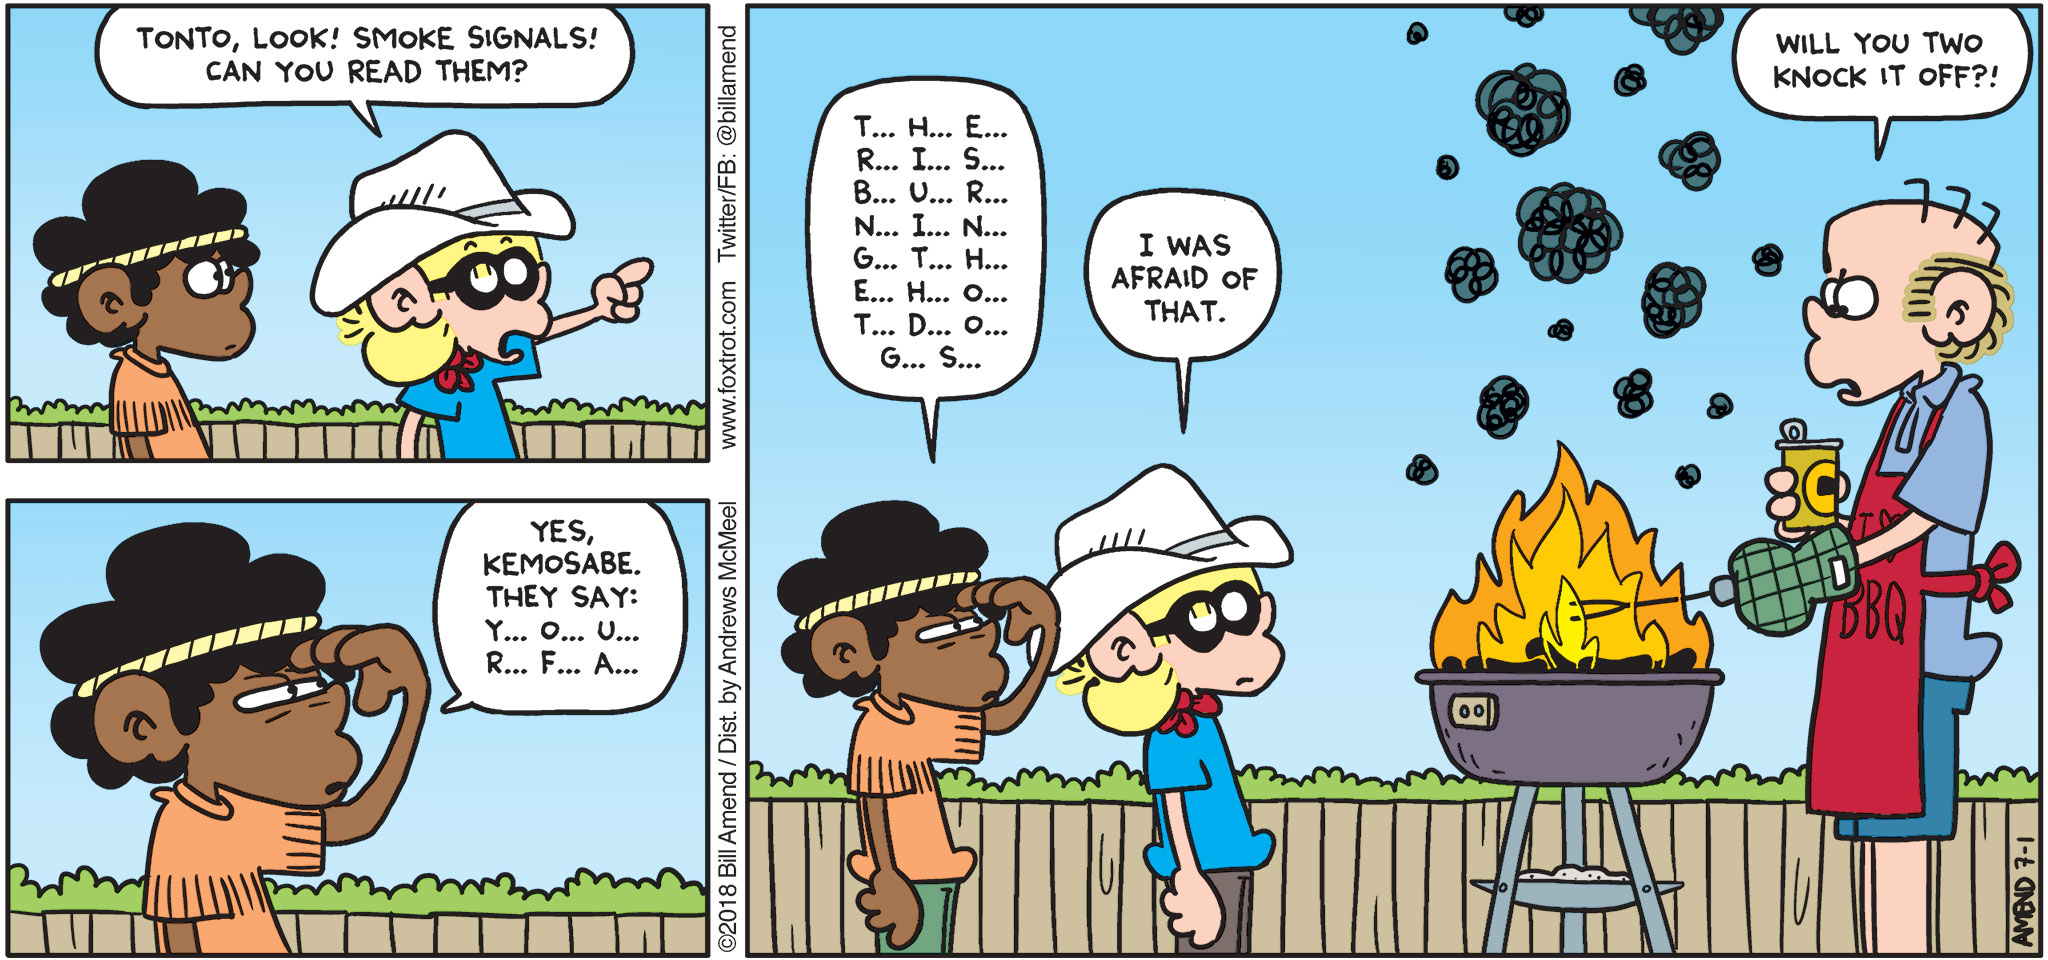 FoxTrot by Bill Amend - "Smoke Signals" published July 1, 2018 - Jason says: Tonto, look! Smoke signals! Can you read them? Marcus says: Yes, Kemosabe. They say: Y... O... U... R... F... A...T... H... E... R... I... S... B... U... R... N... I... N... G... T... H... E... H... O... T... D... O... G... S... Jason says: I was afraid of that. Roger says: Will you two knock it off?!